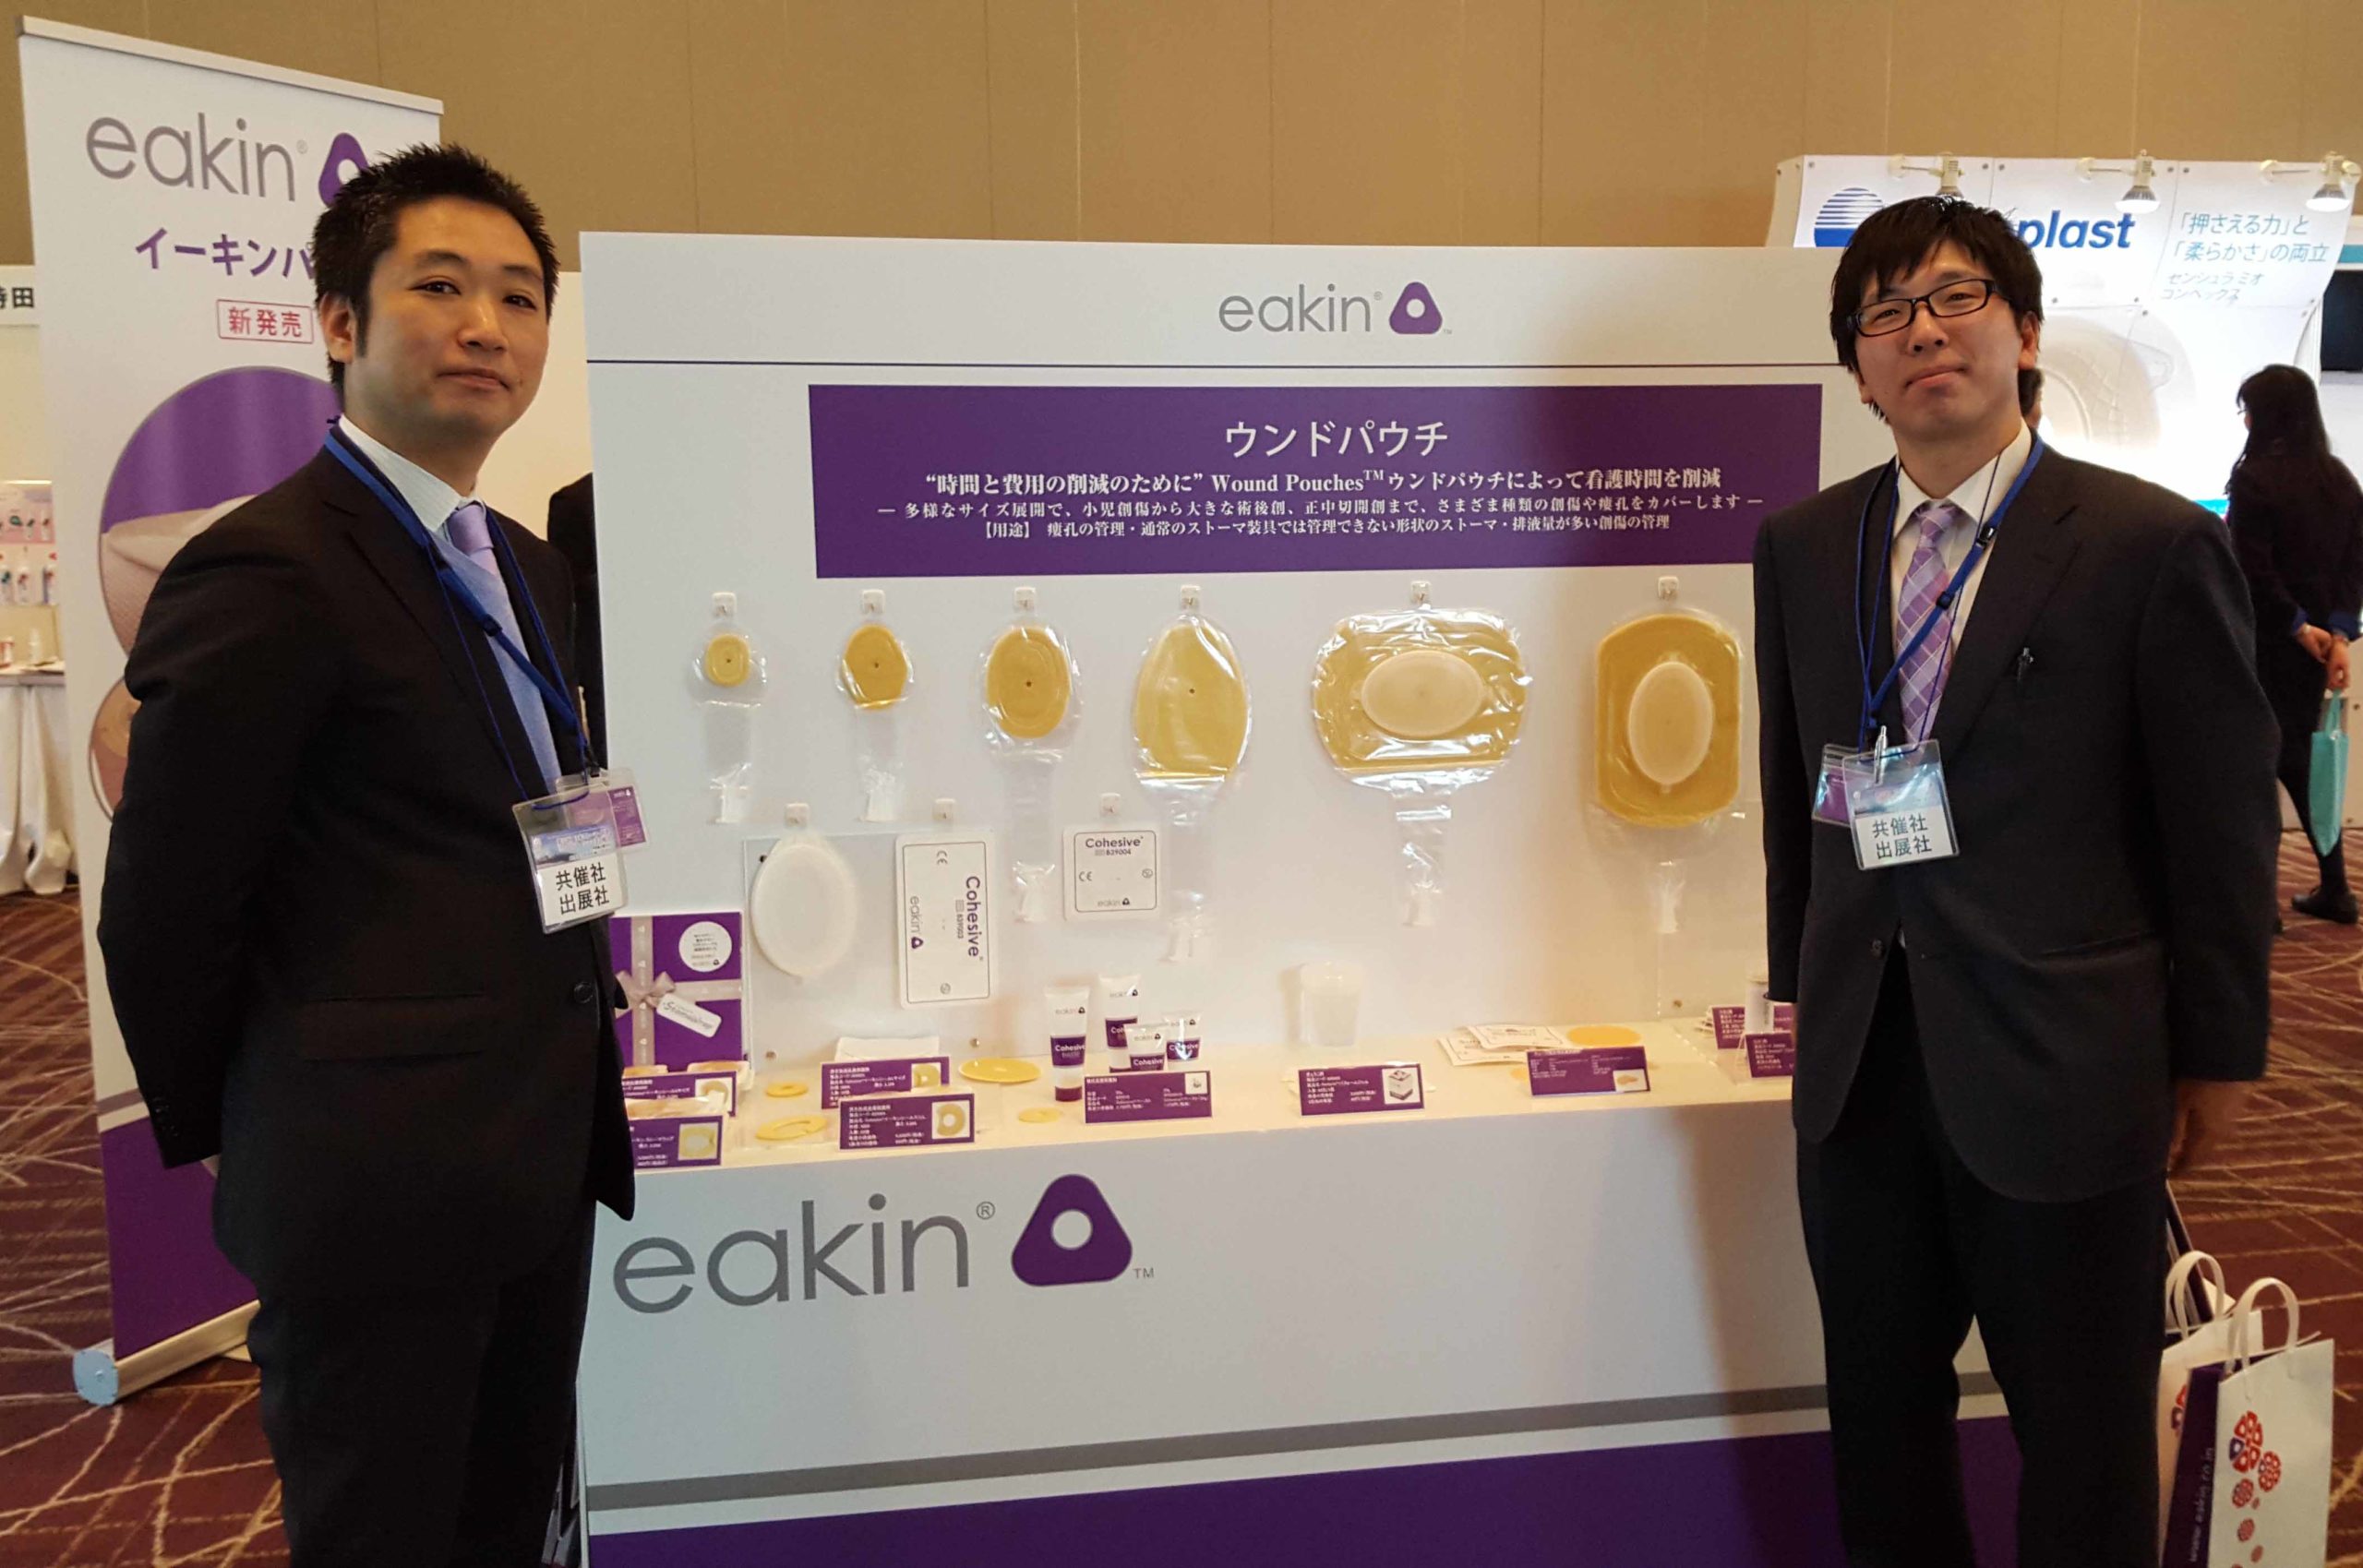 Display of eakin wound pouches in Japan